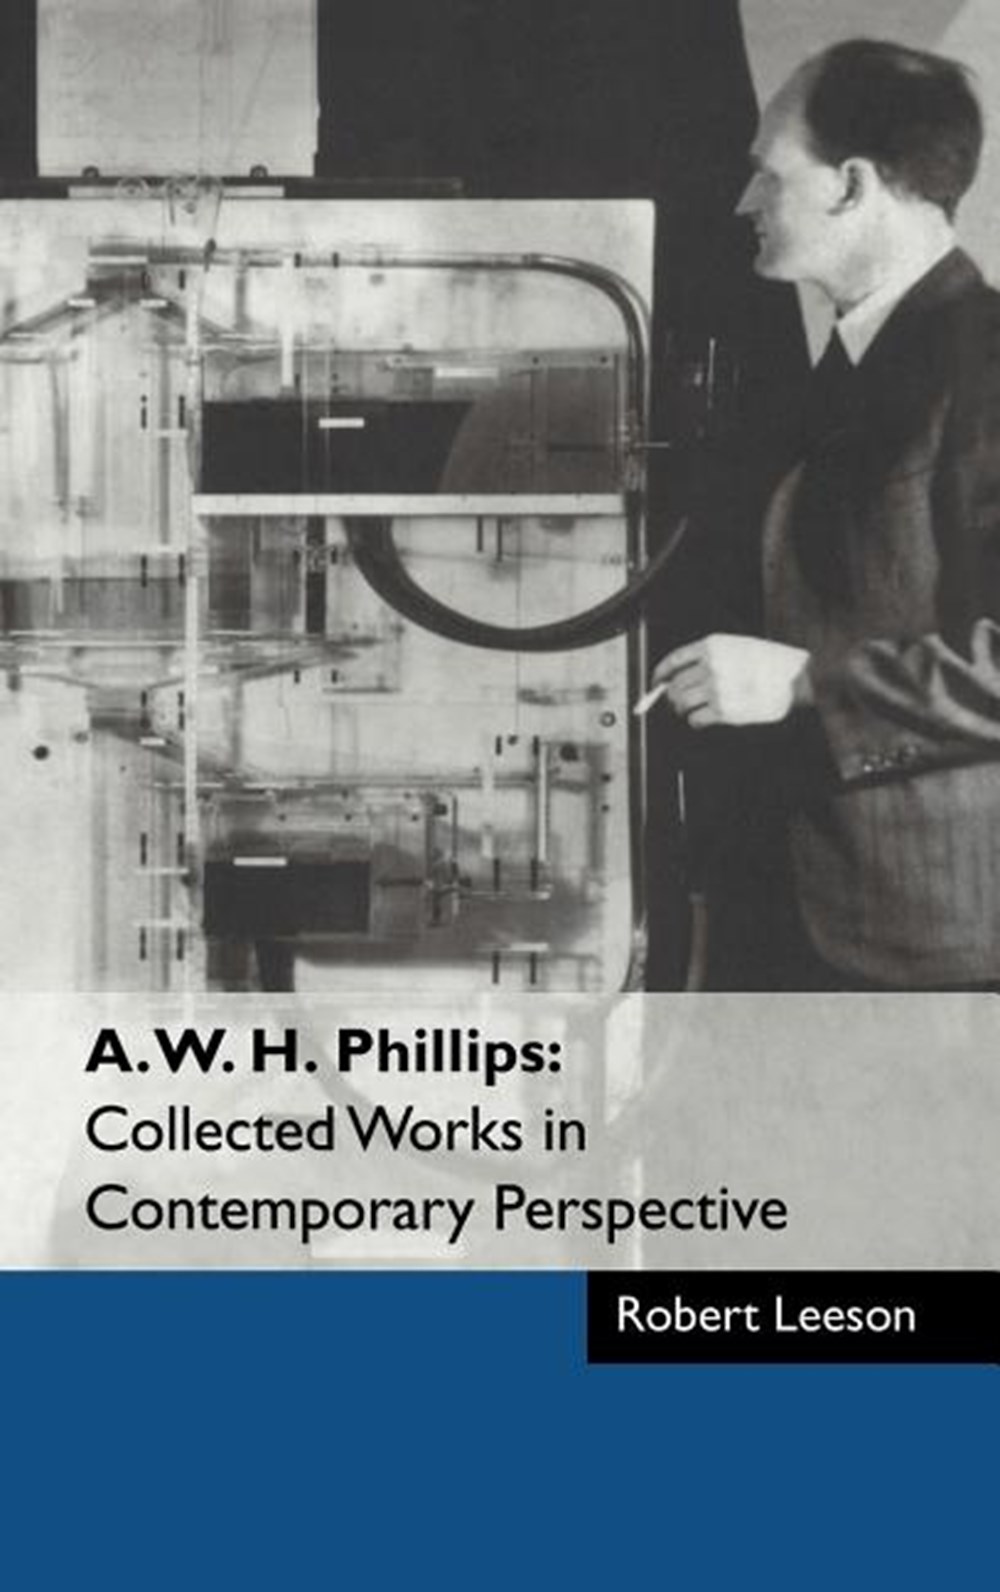 A. W. H. Phillips Collected Works in Contemporary Perspective